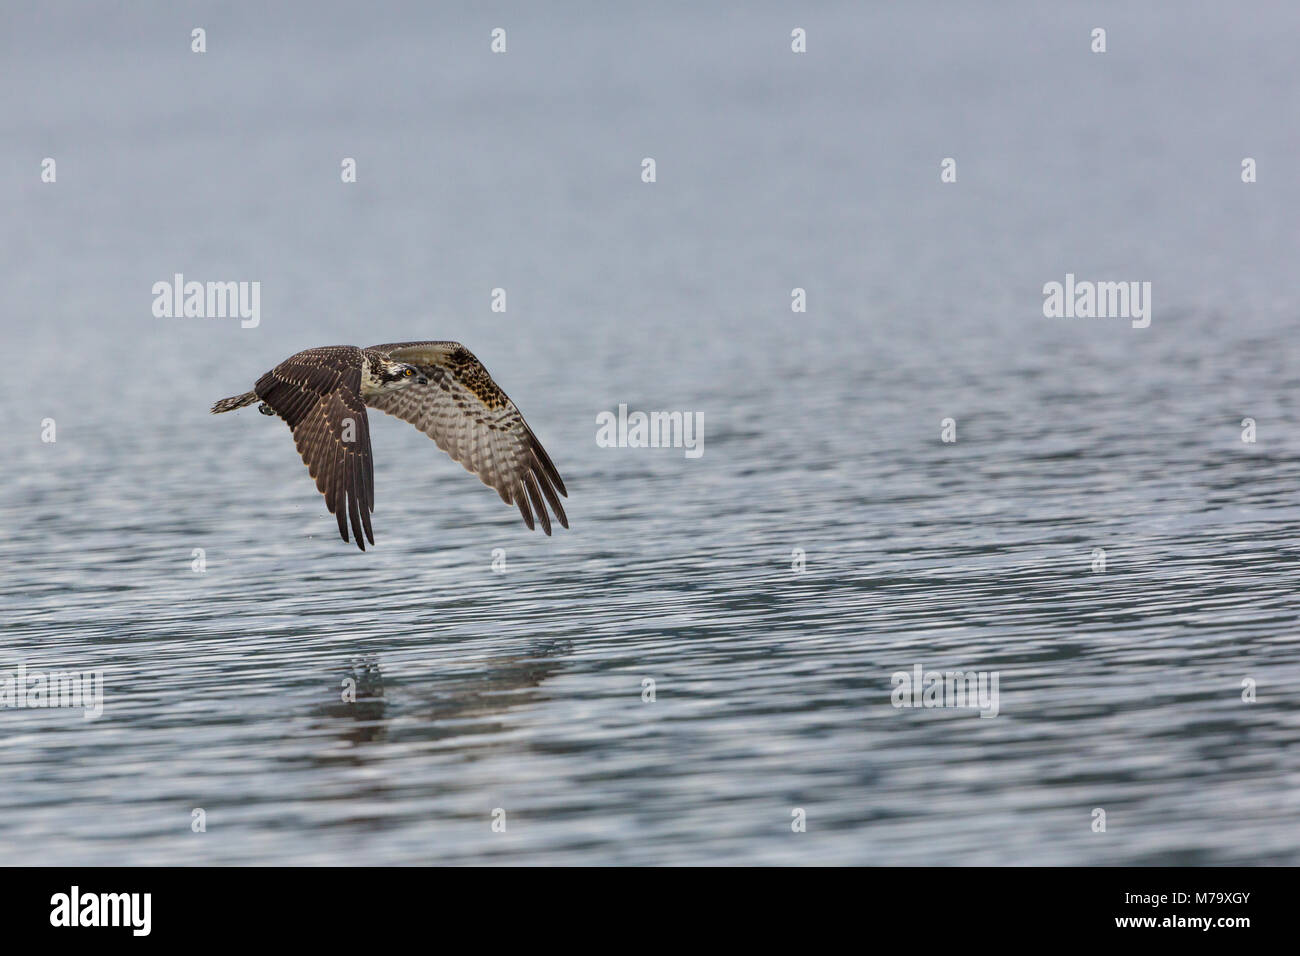 Young Ospery in flight over water wings down Stock Photo